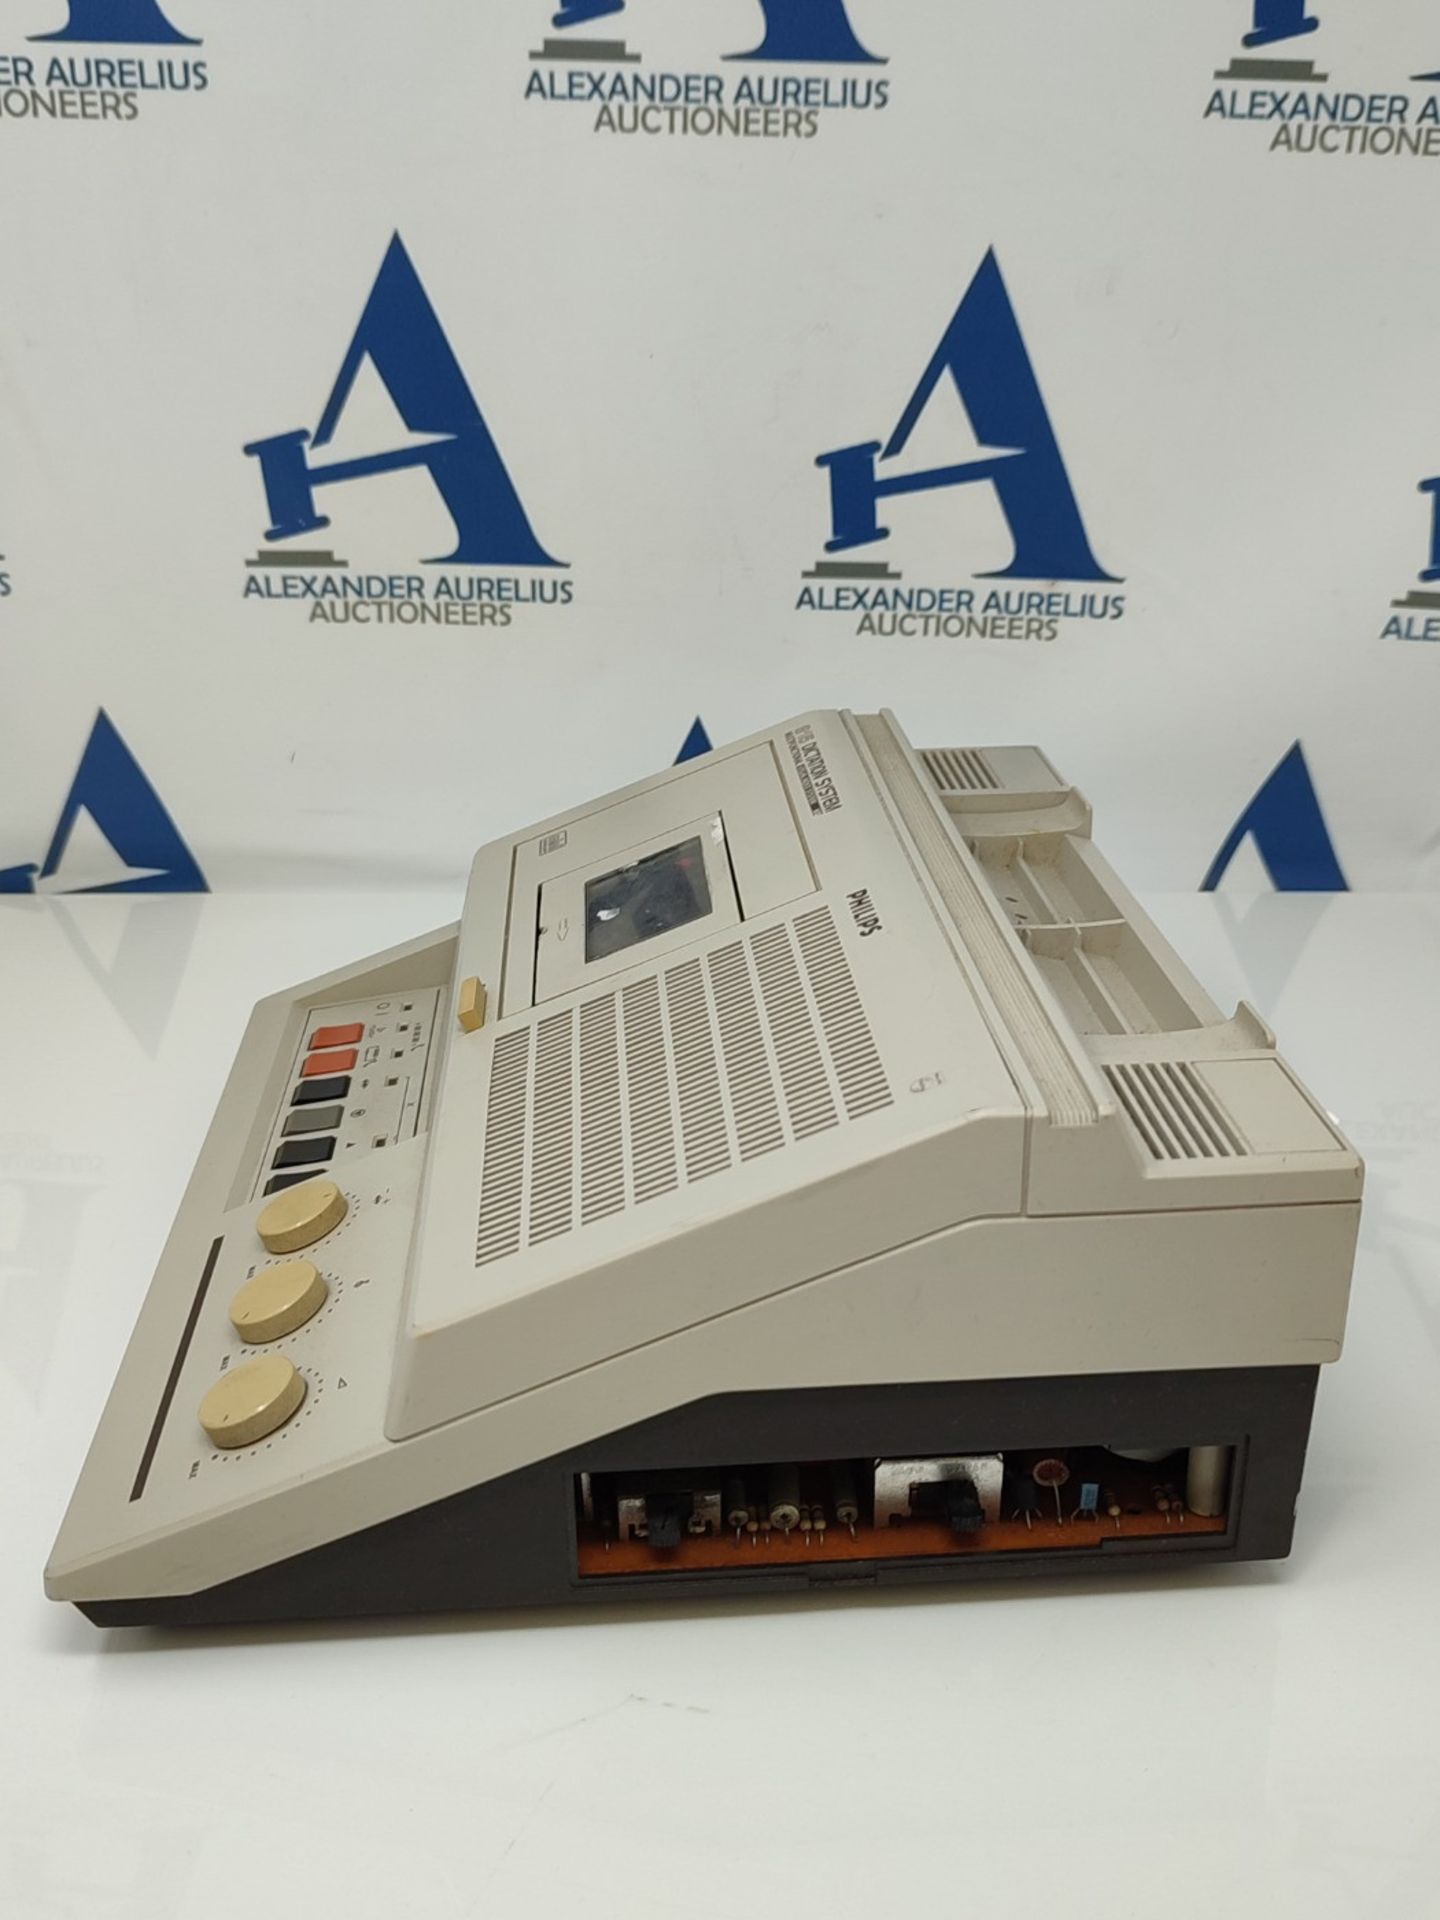 Philips 815 Dictation System Executive MiniCassette Recorder - Image 2 of 2